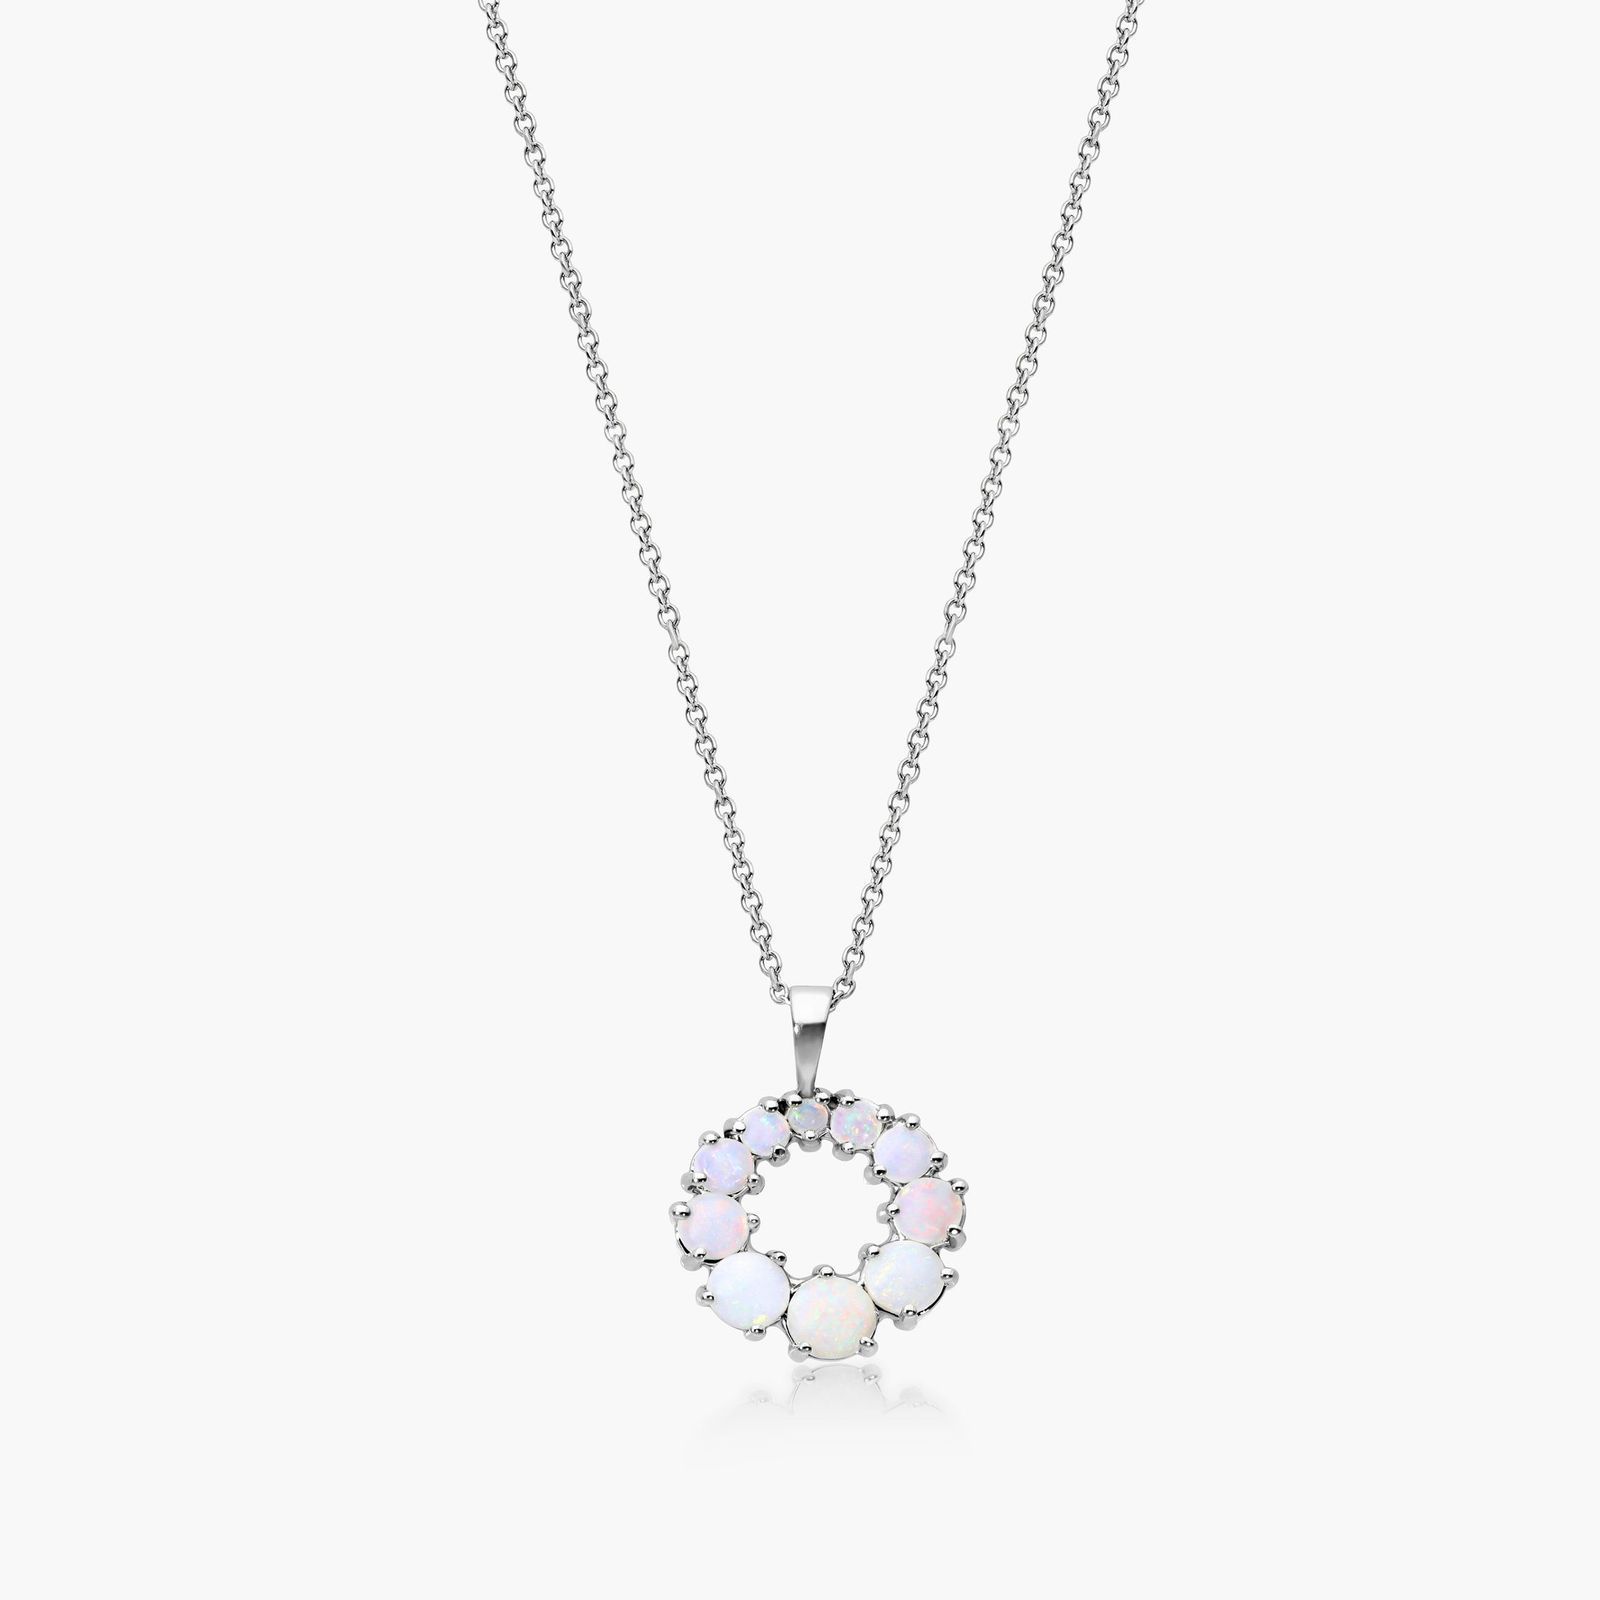 graduated opal pendant necklace in white gold setting